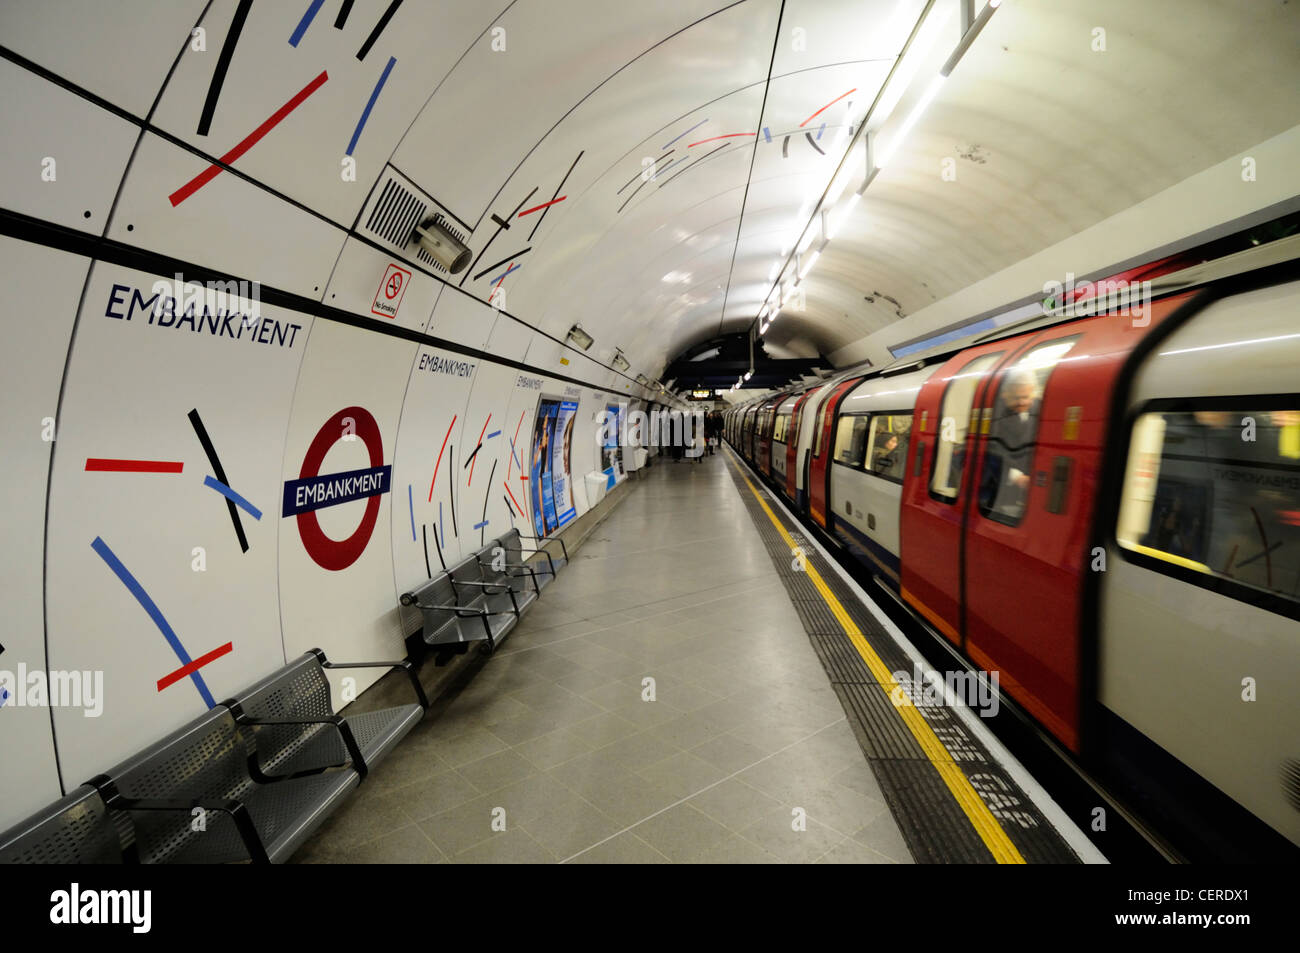 A Northern line tube train departing from Embankment Underground station. Stock Photo